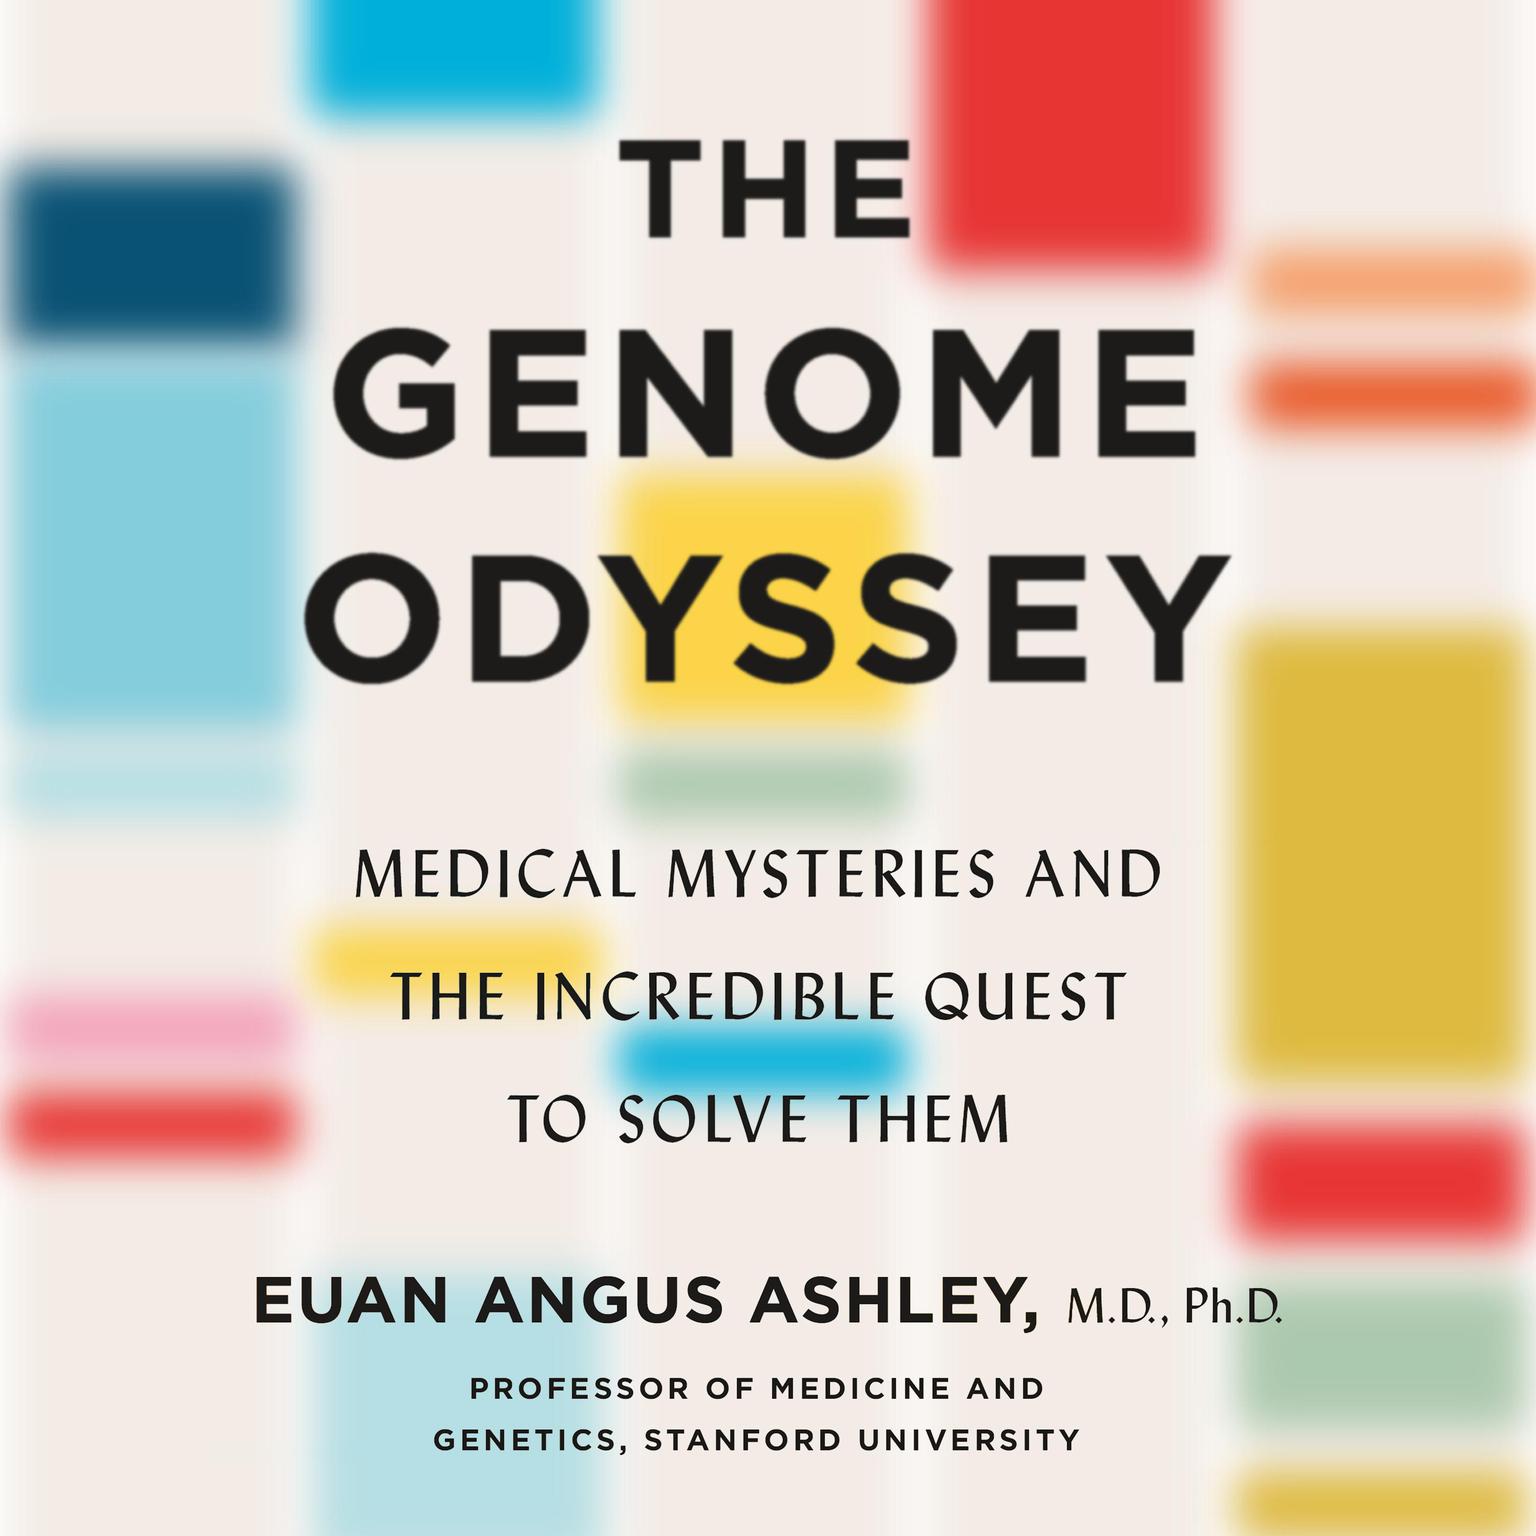 The Genome Odyssey: Medical Mysteries and the Incredible Quest to Solve Them Audiobook, by Euan Angus Ashley